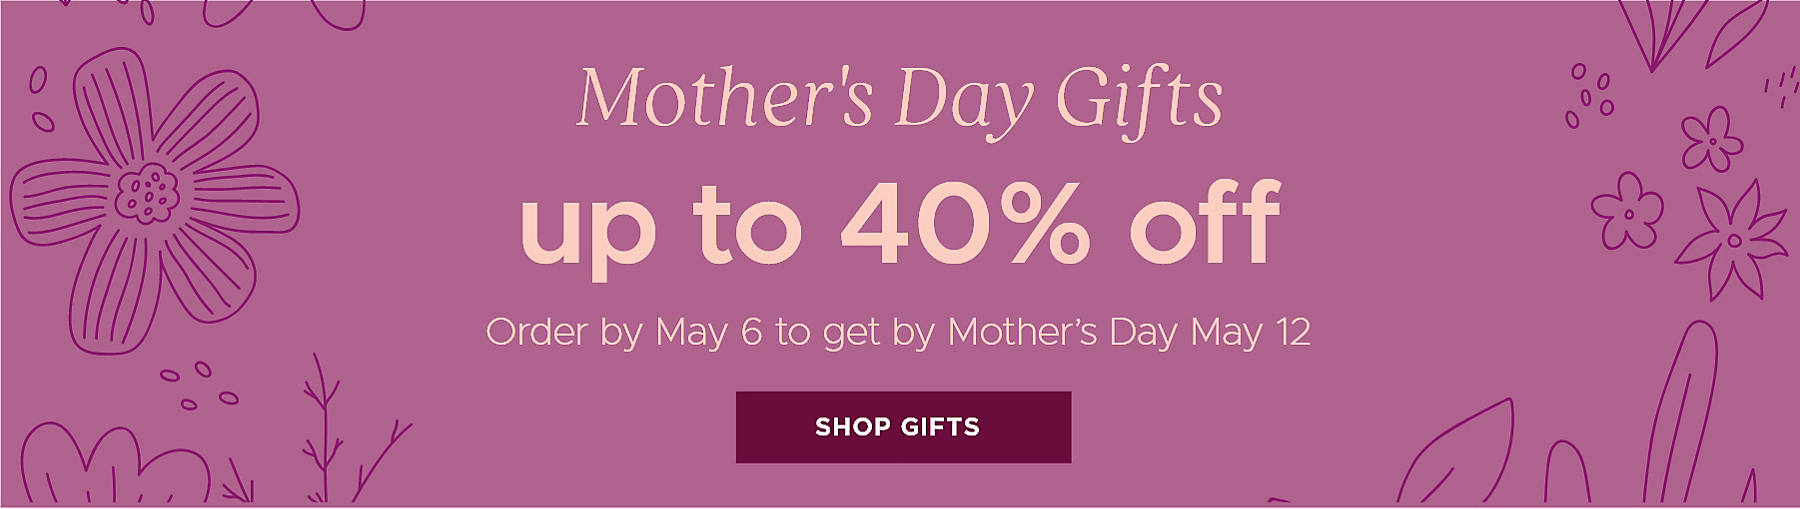 Mother's Day Gifts up to 40% off Order by May 6 to get by Mother's Day May 12 Shop Gifts